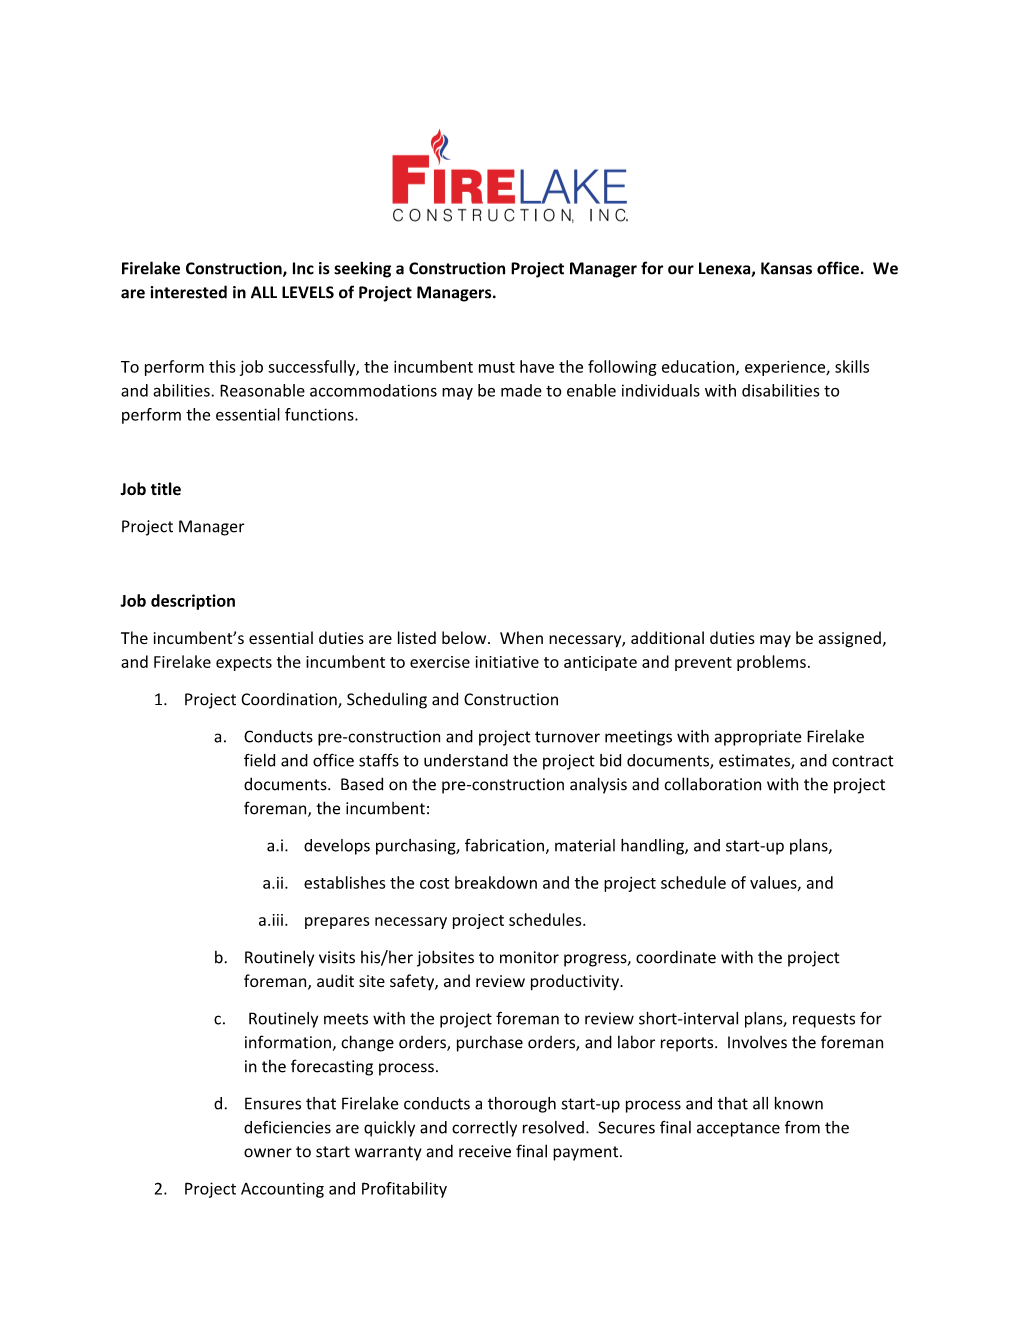 Firelake Construction, Inc Is Seeking a Construction Project Manager for Our Lenexa, Kansas